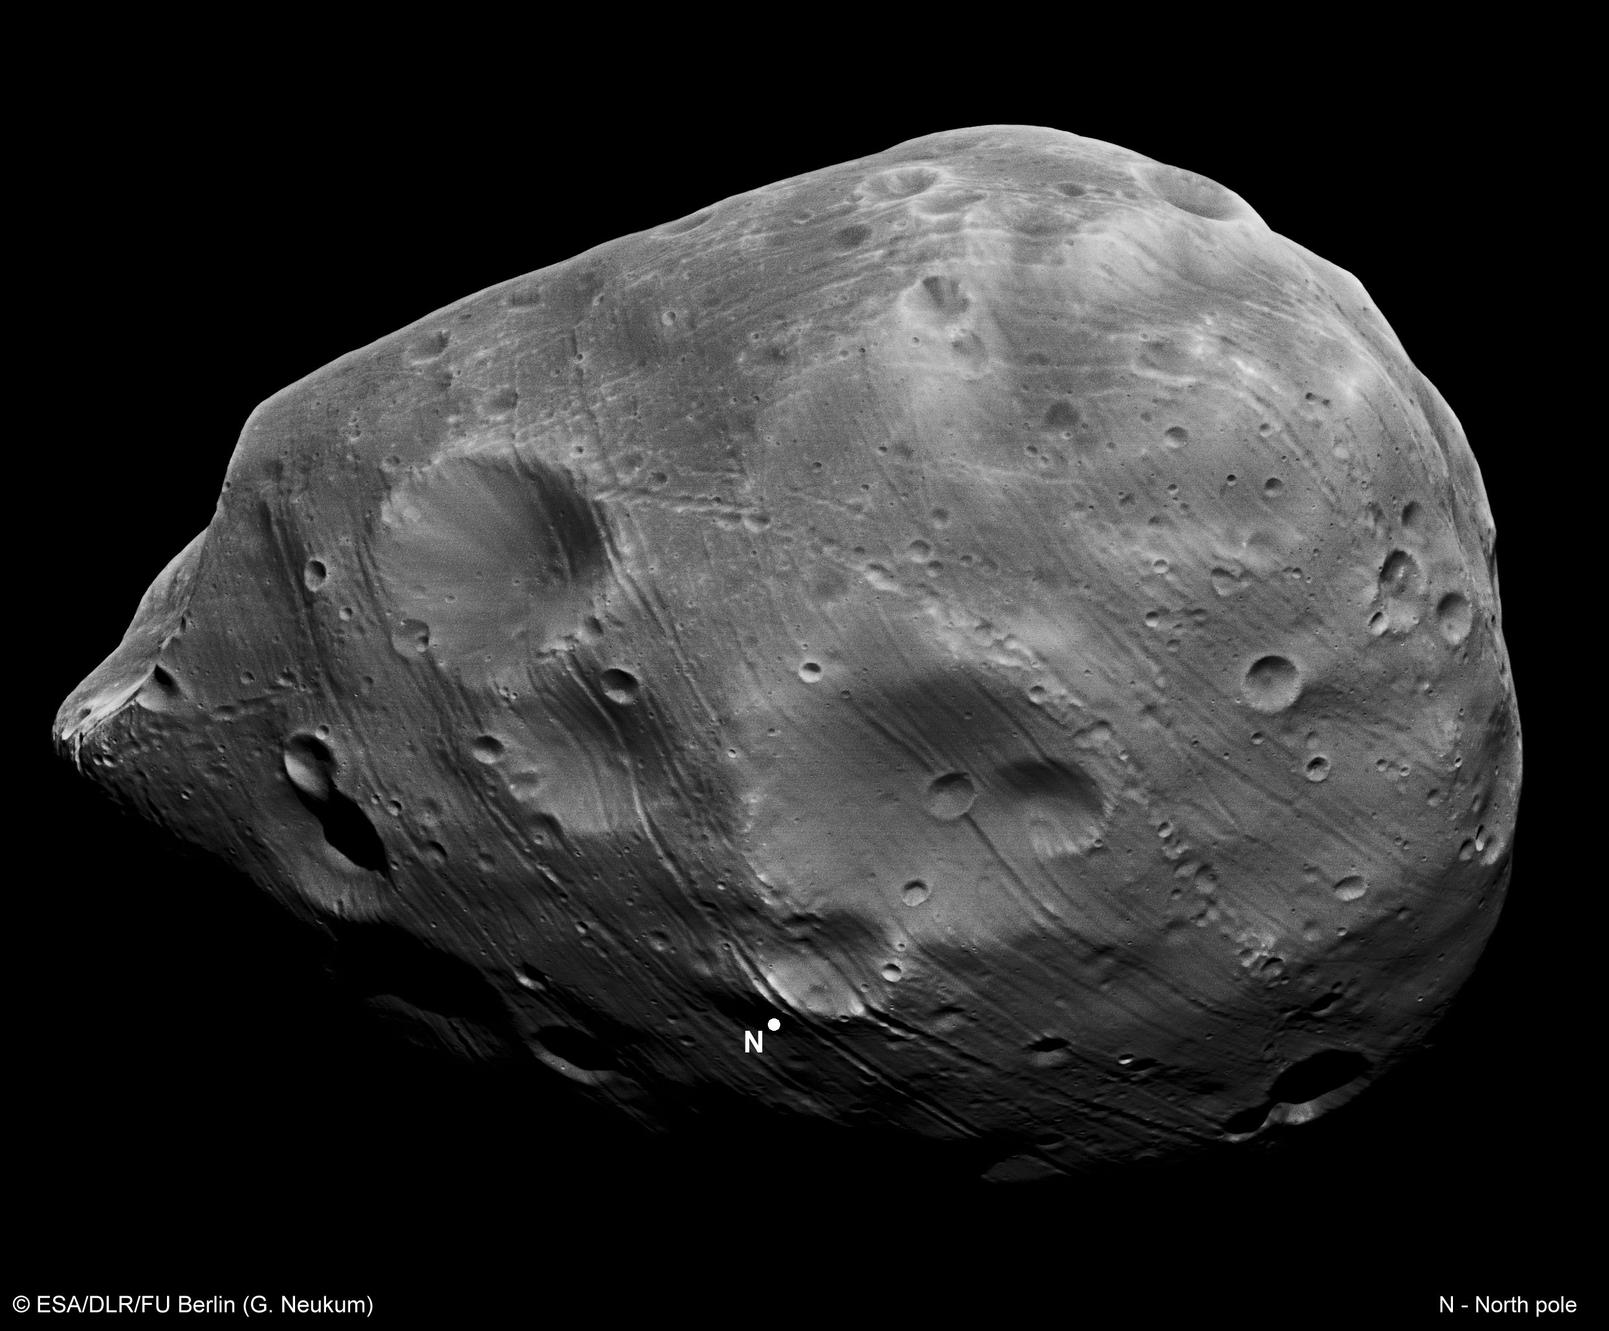 Visible in great detail is Phobos' irregular shape, strangely dark terrain, numerous unusual grooves, and a spectacular chain of craters crossing the image center.